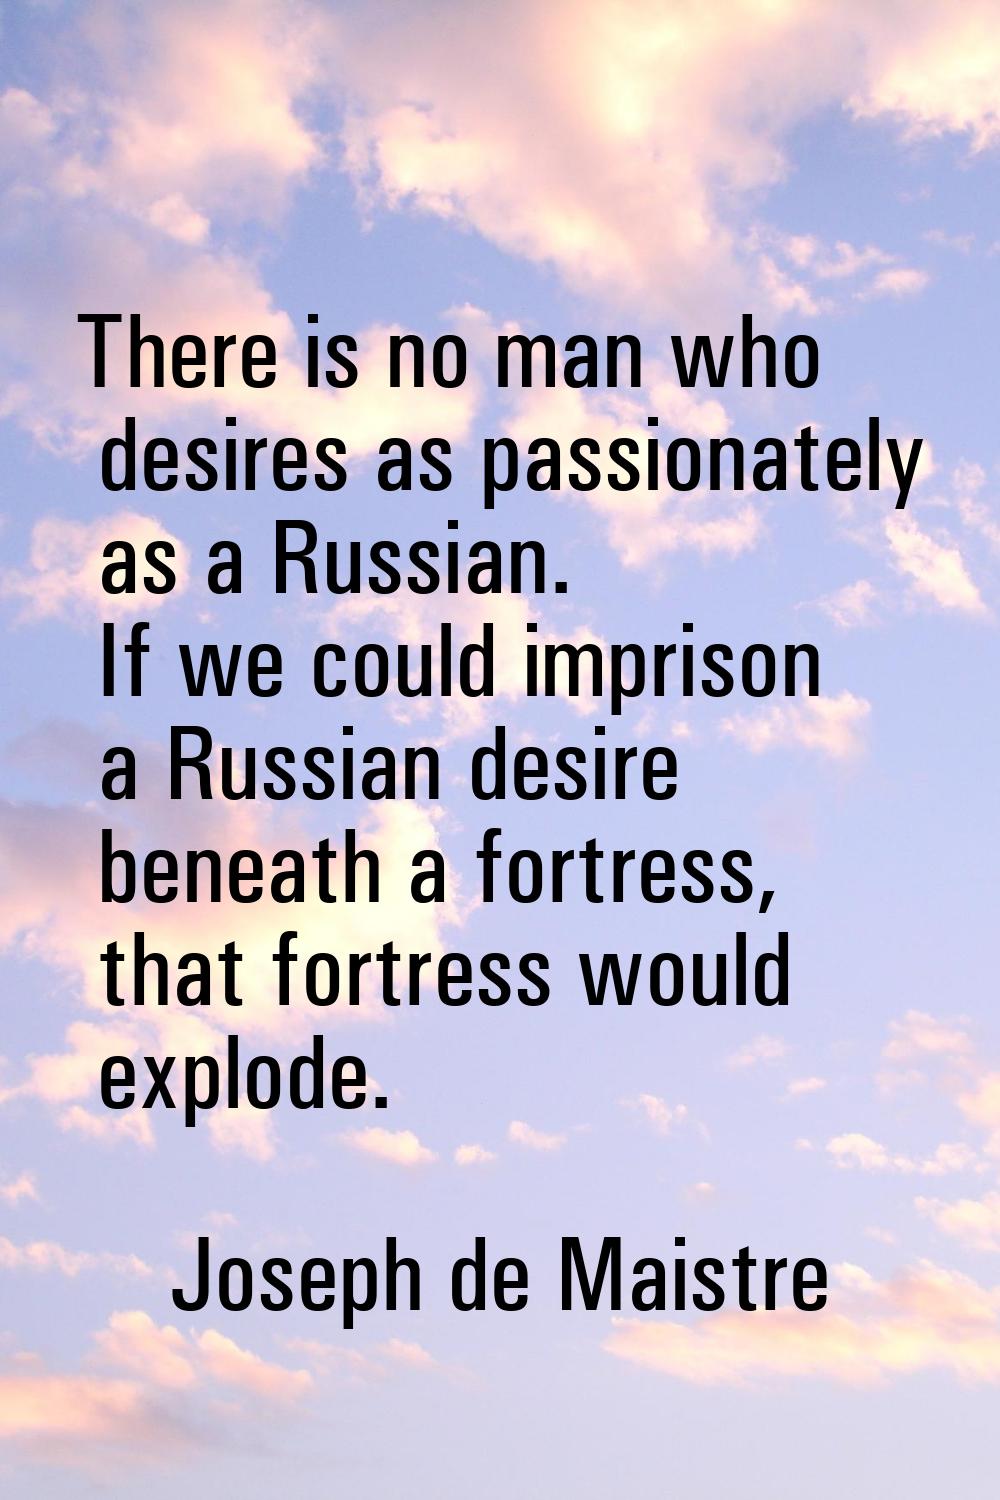 There is no man who desires as passionately as a Russian. If we could imprison a Russian desire ben